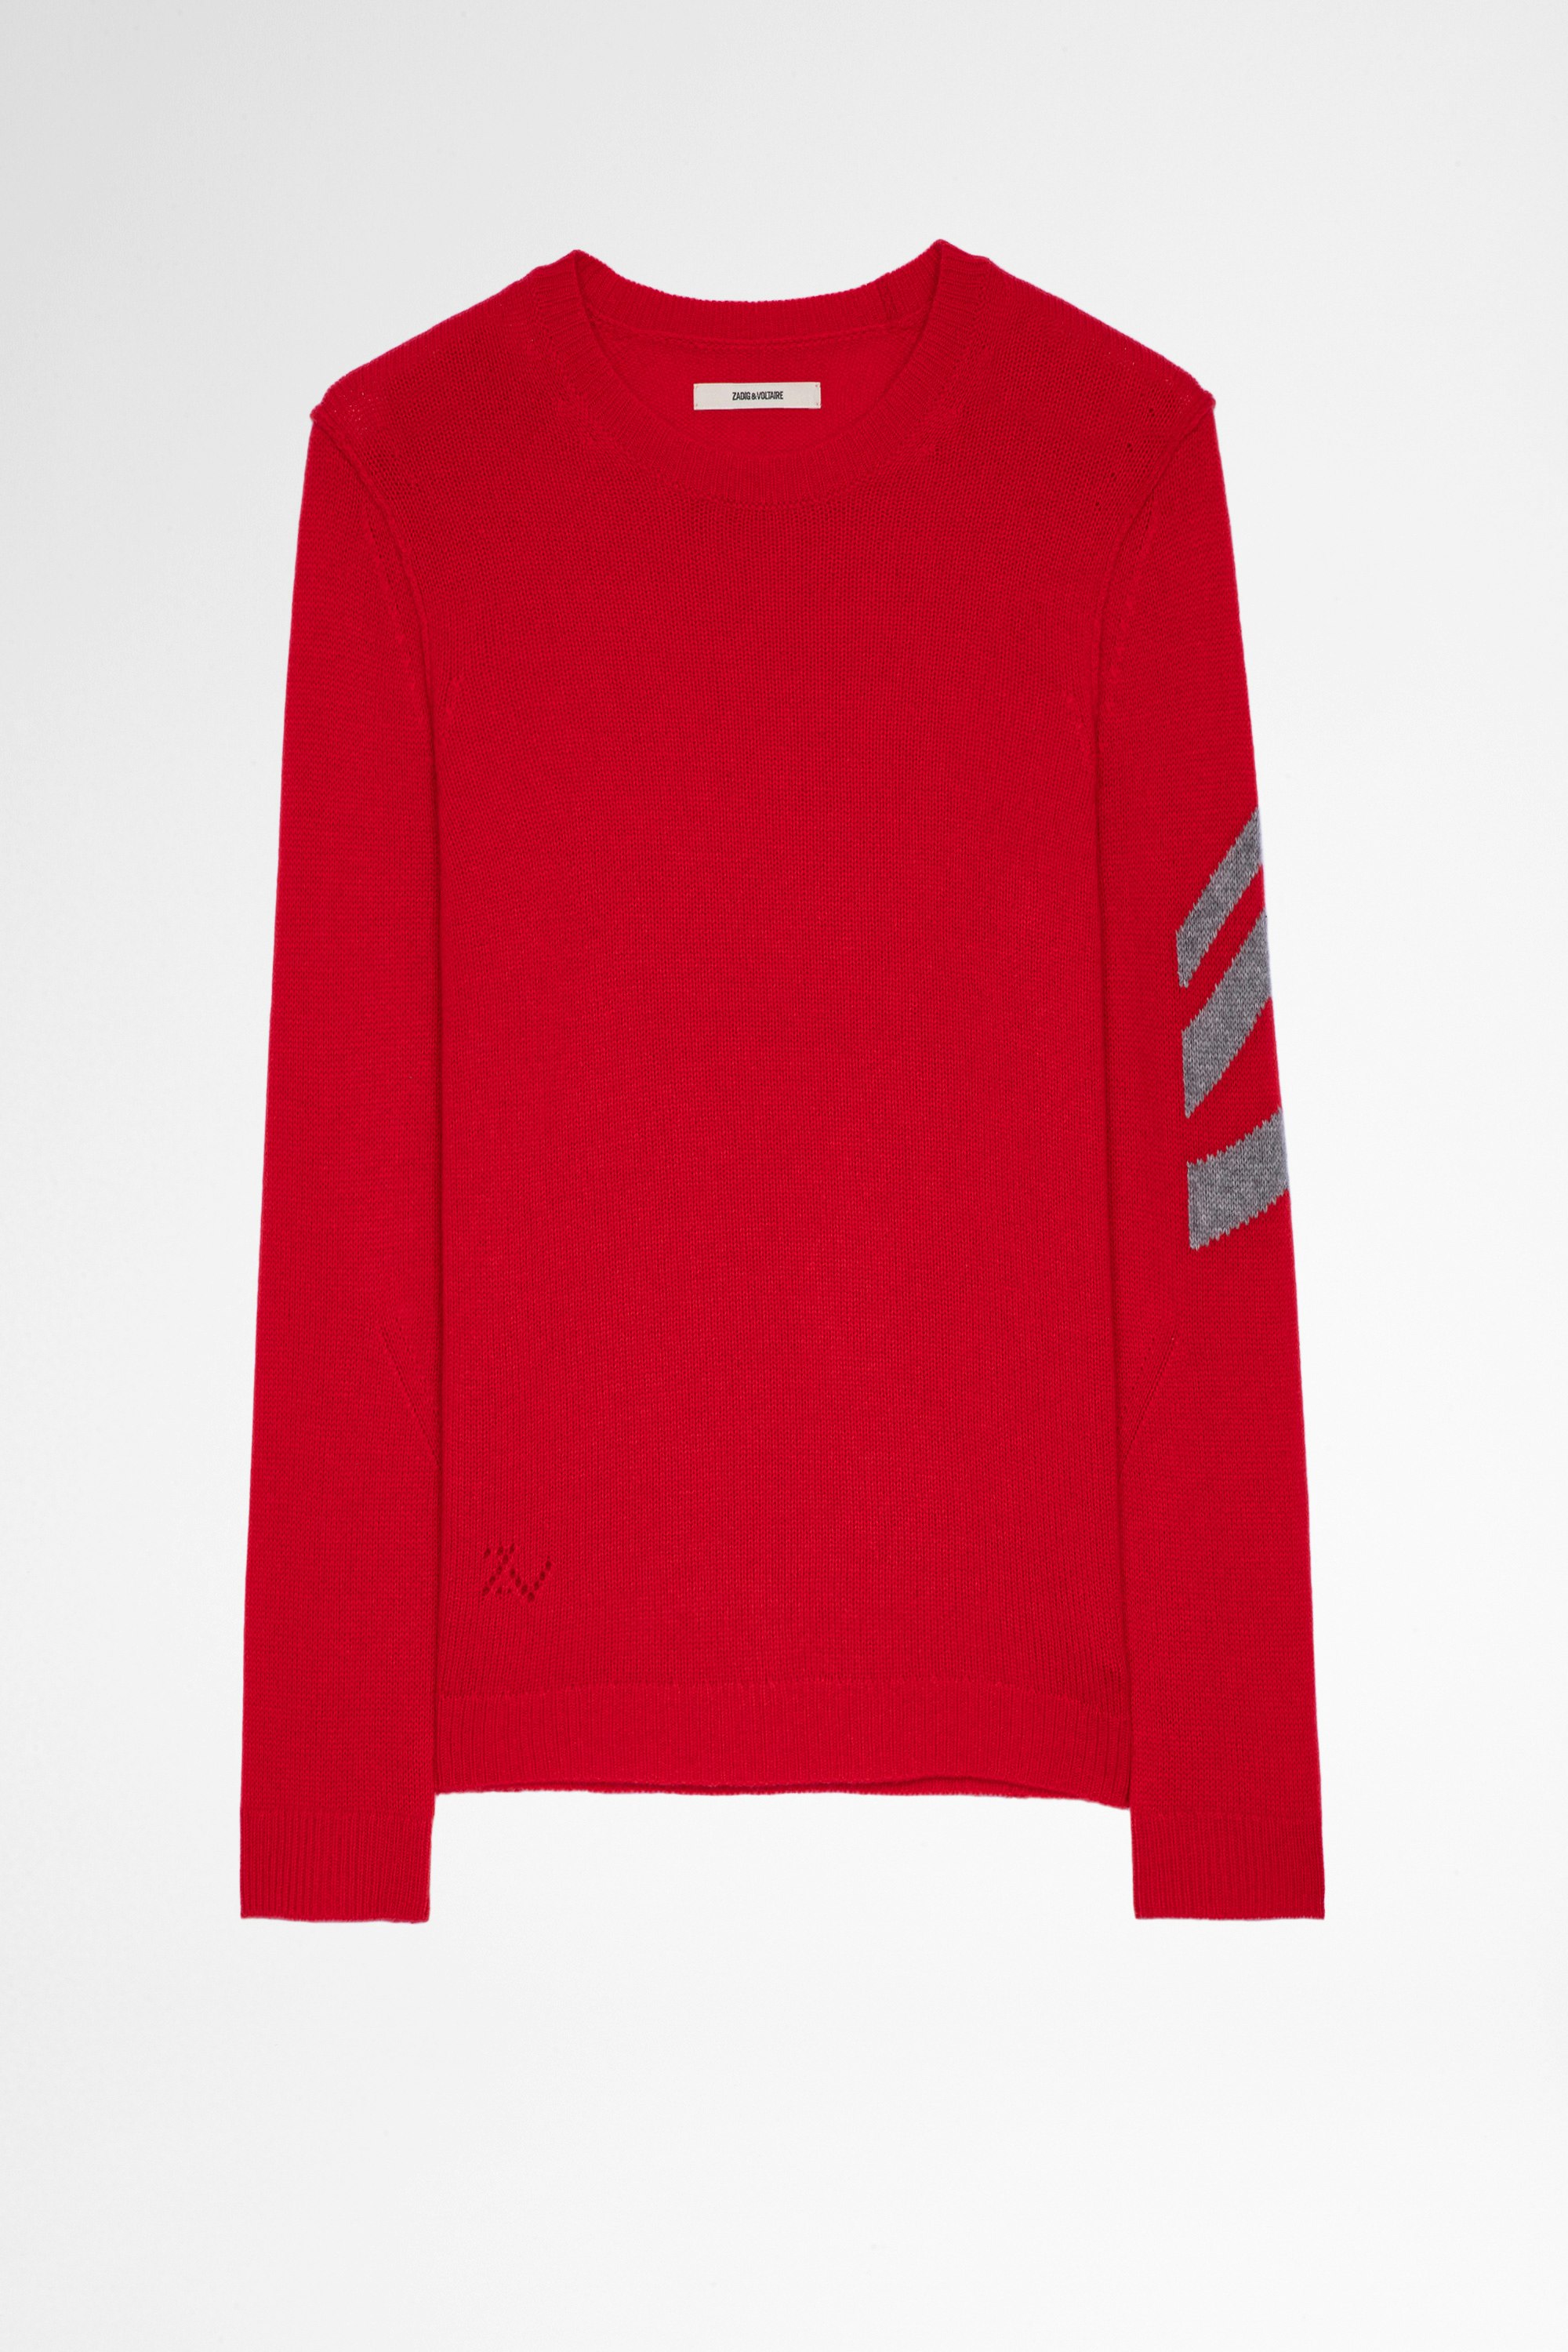 Kennedy Arrow Cashmere Jumper Men's red cashmere sweater with arrow pattern 